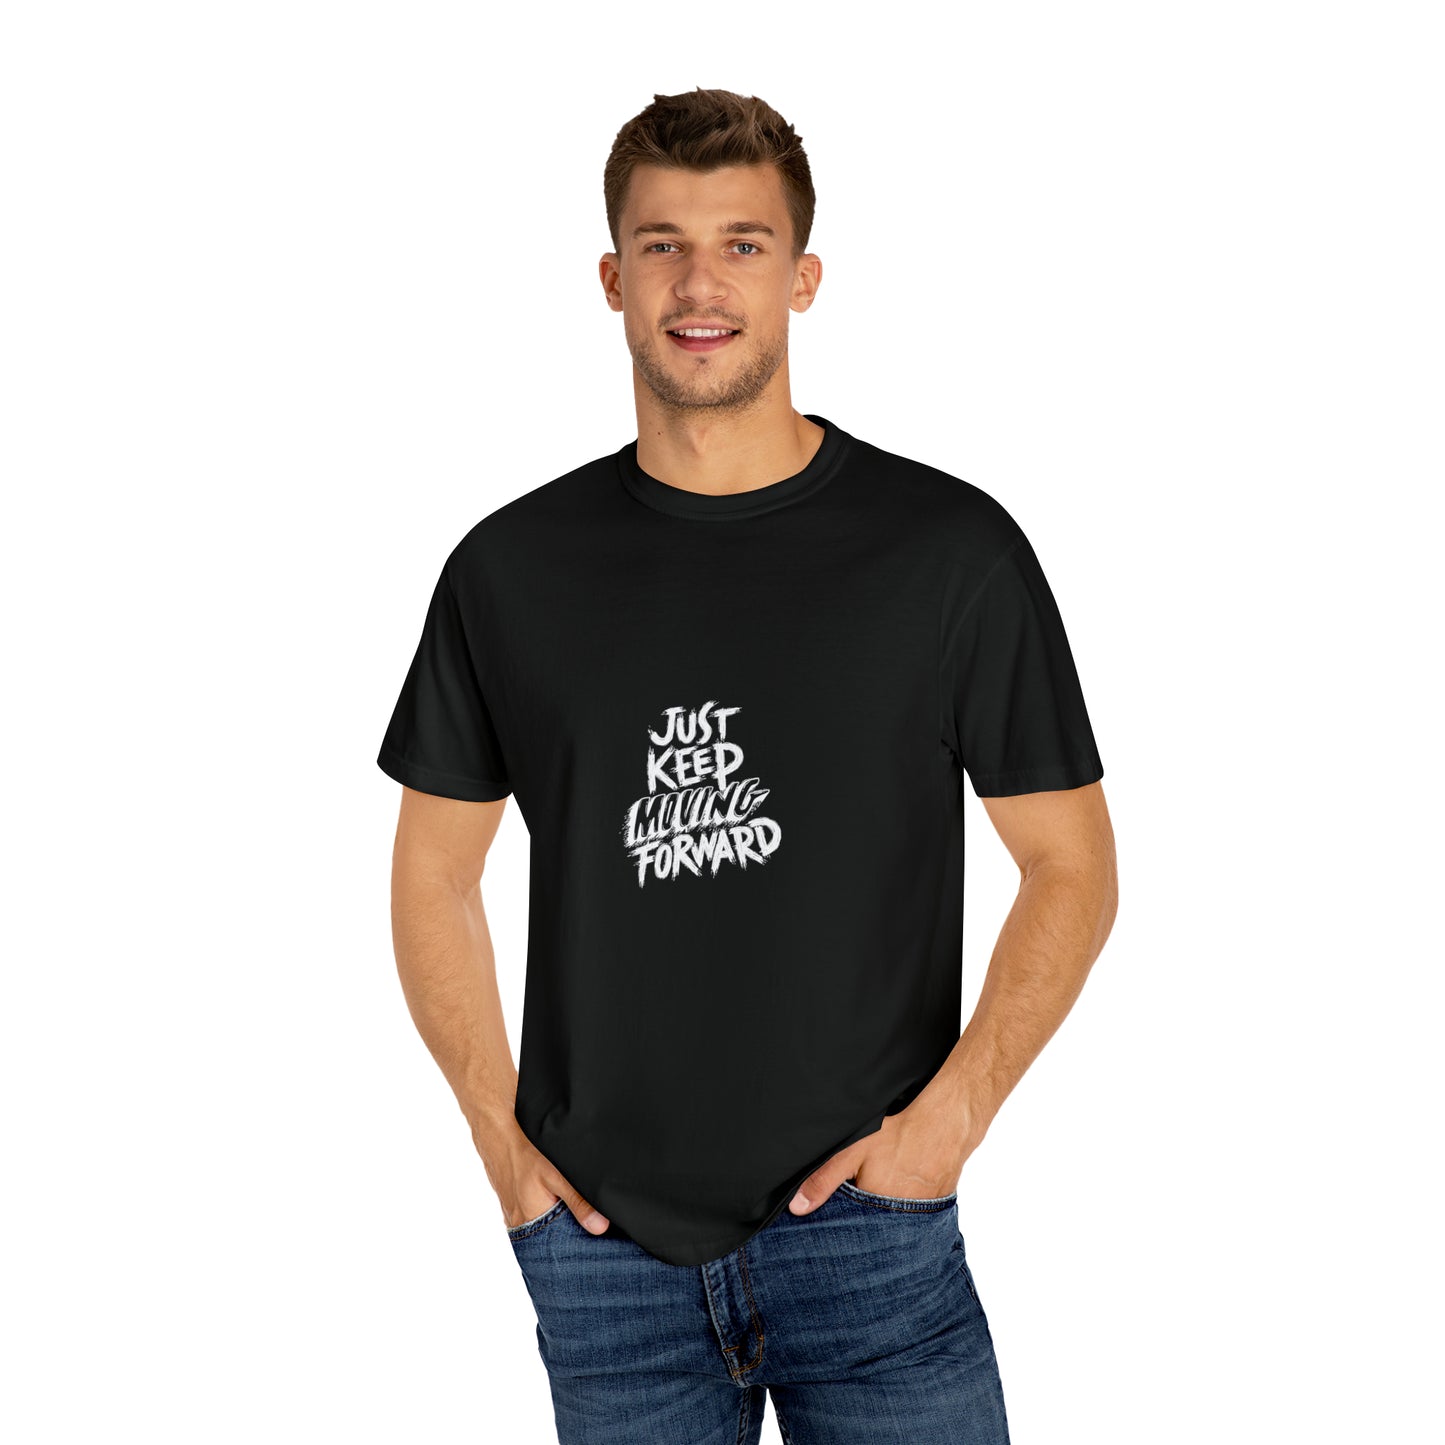 JUST Keep Moving Forward - Unisex Garment-Dyed T-shirt